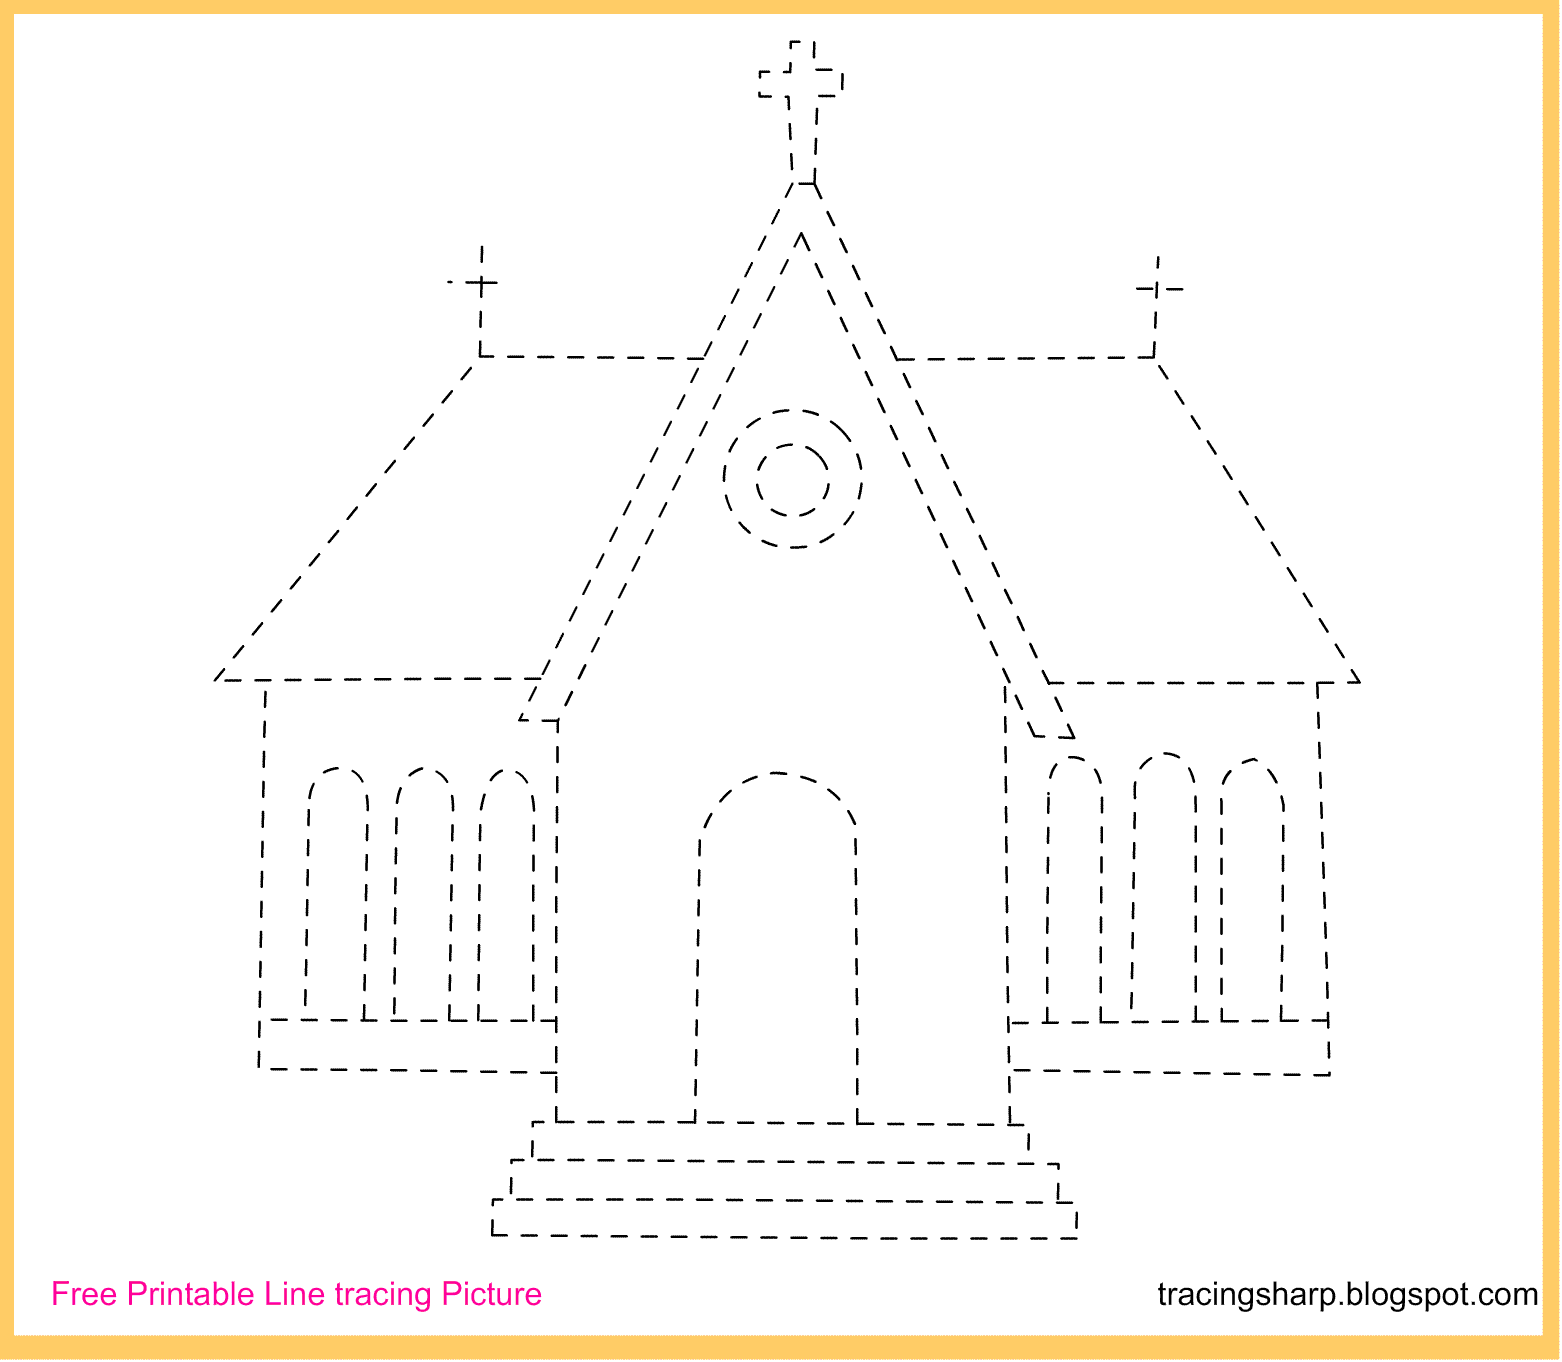 free-tracing-line-printable-church-tracing-picture